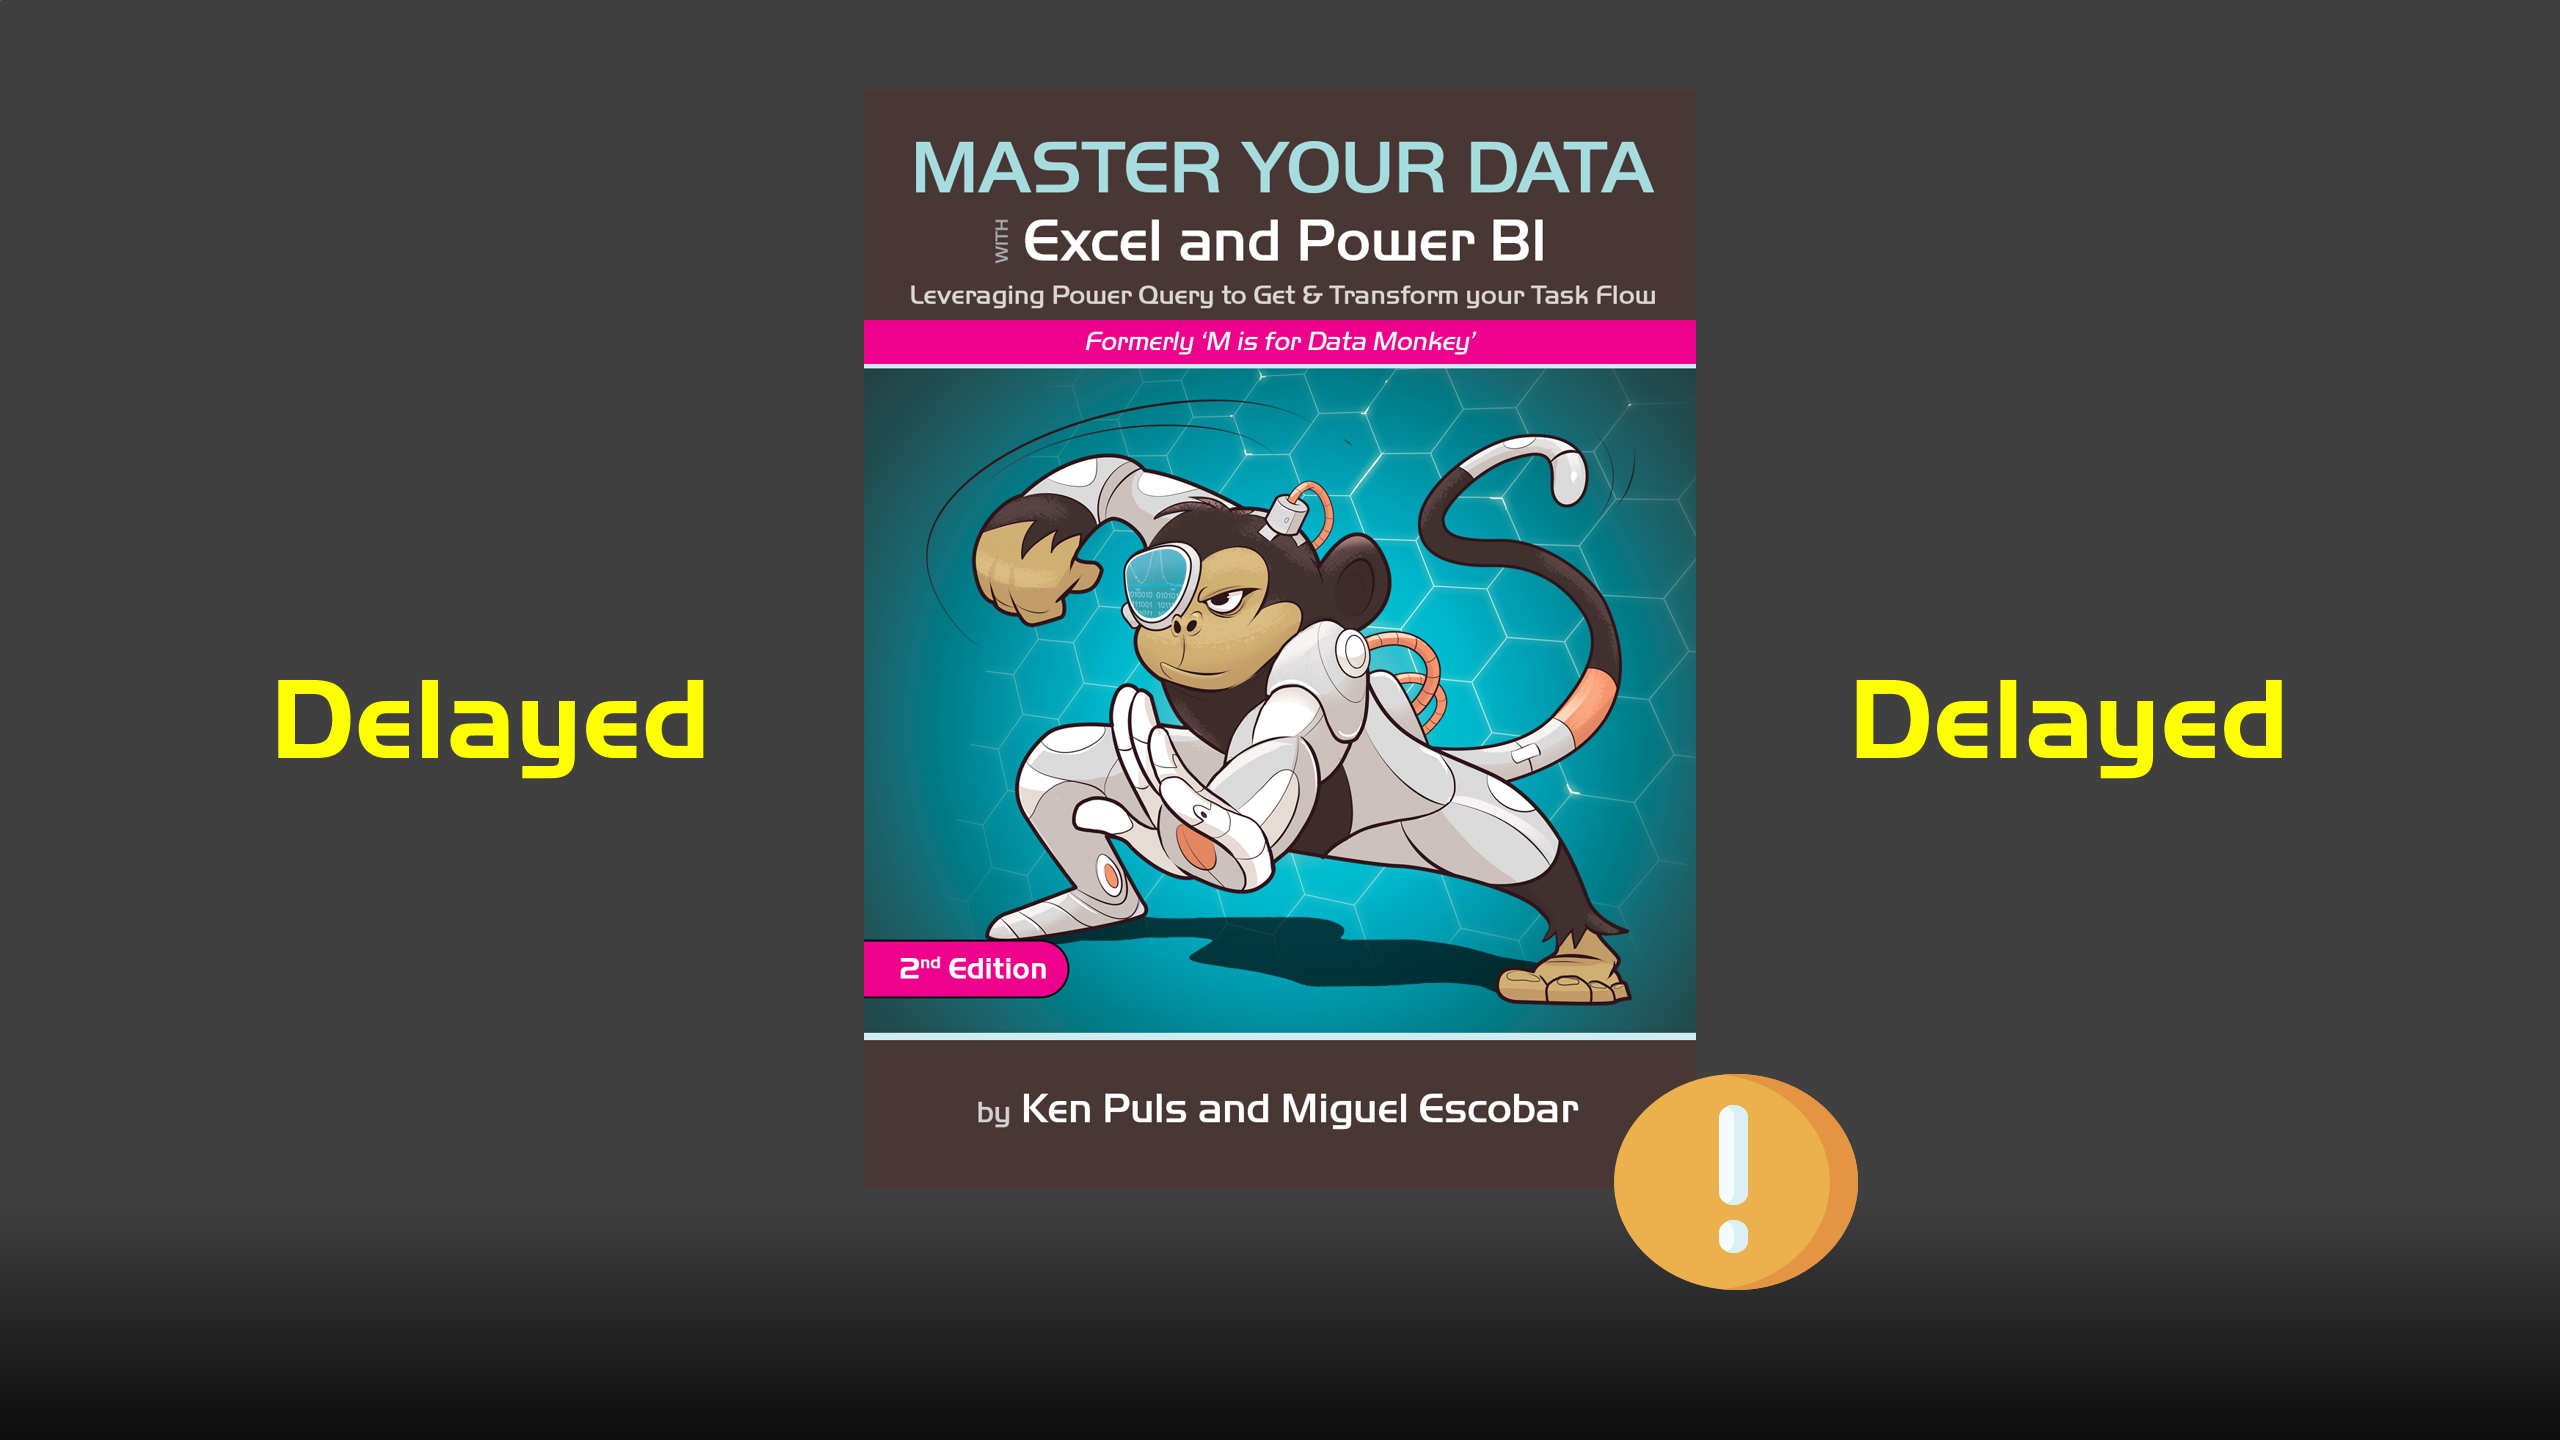 Second edition of ‘M is for Data Monkey’ is delayed